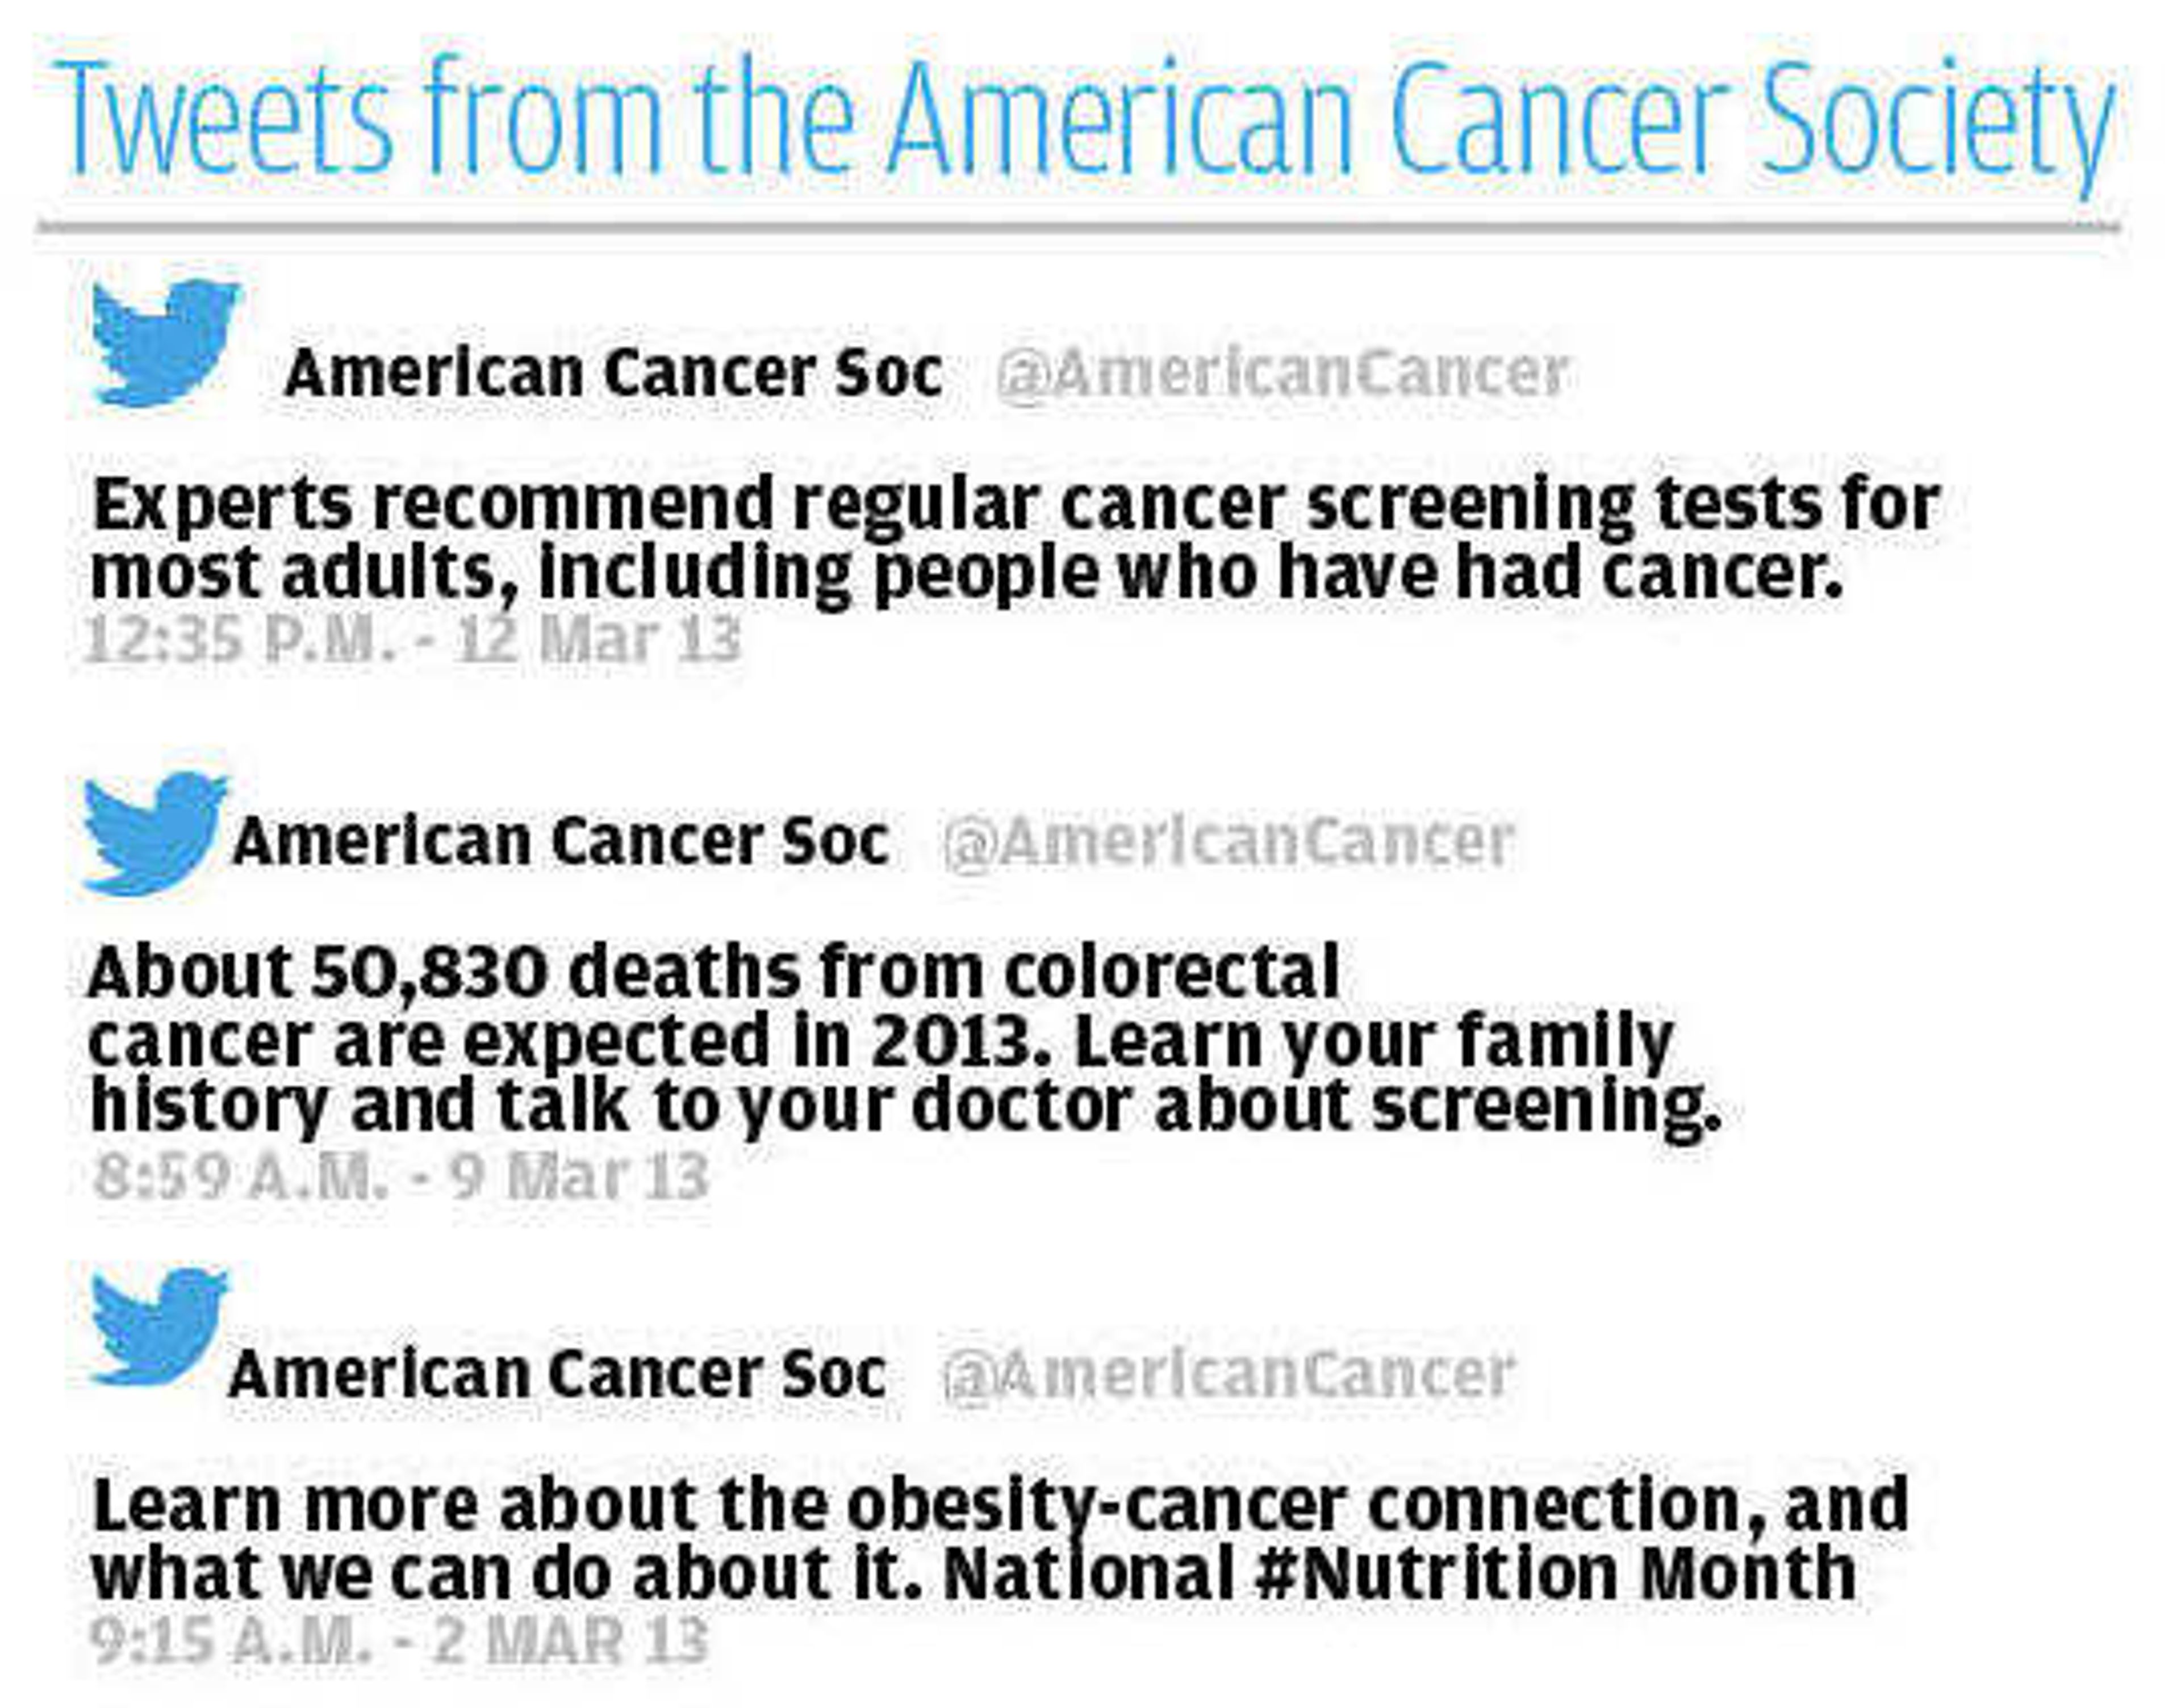 Tweets from the American Cancer Society Twitter account.